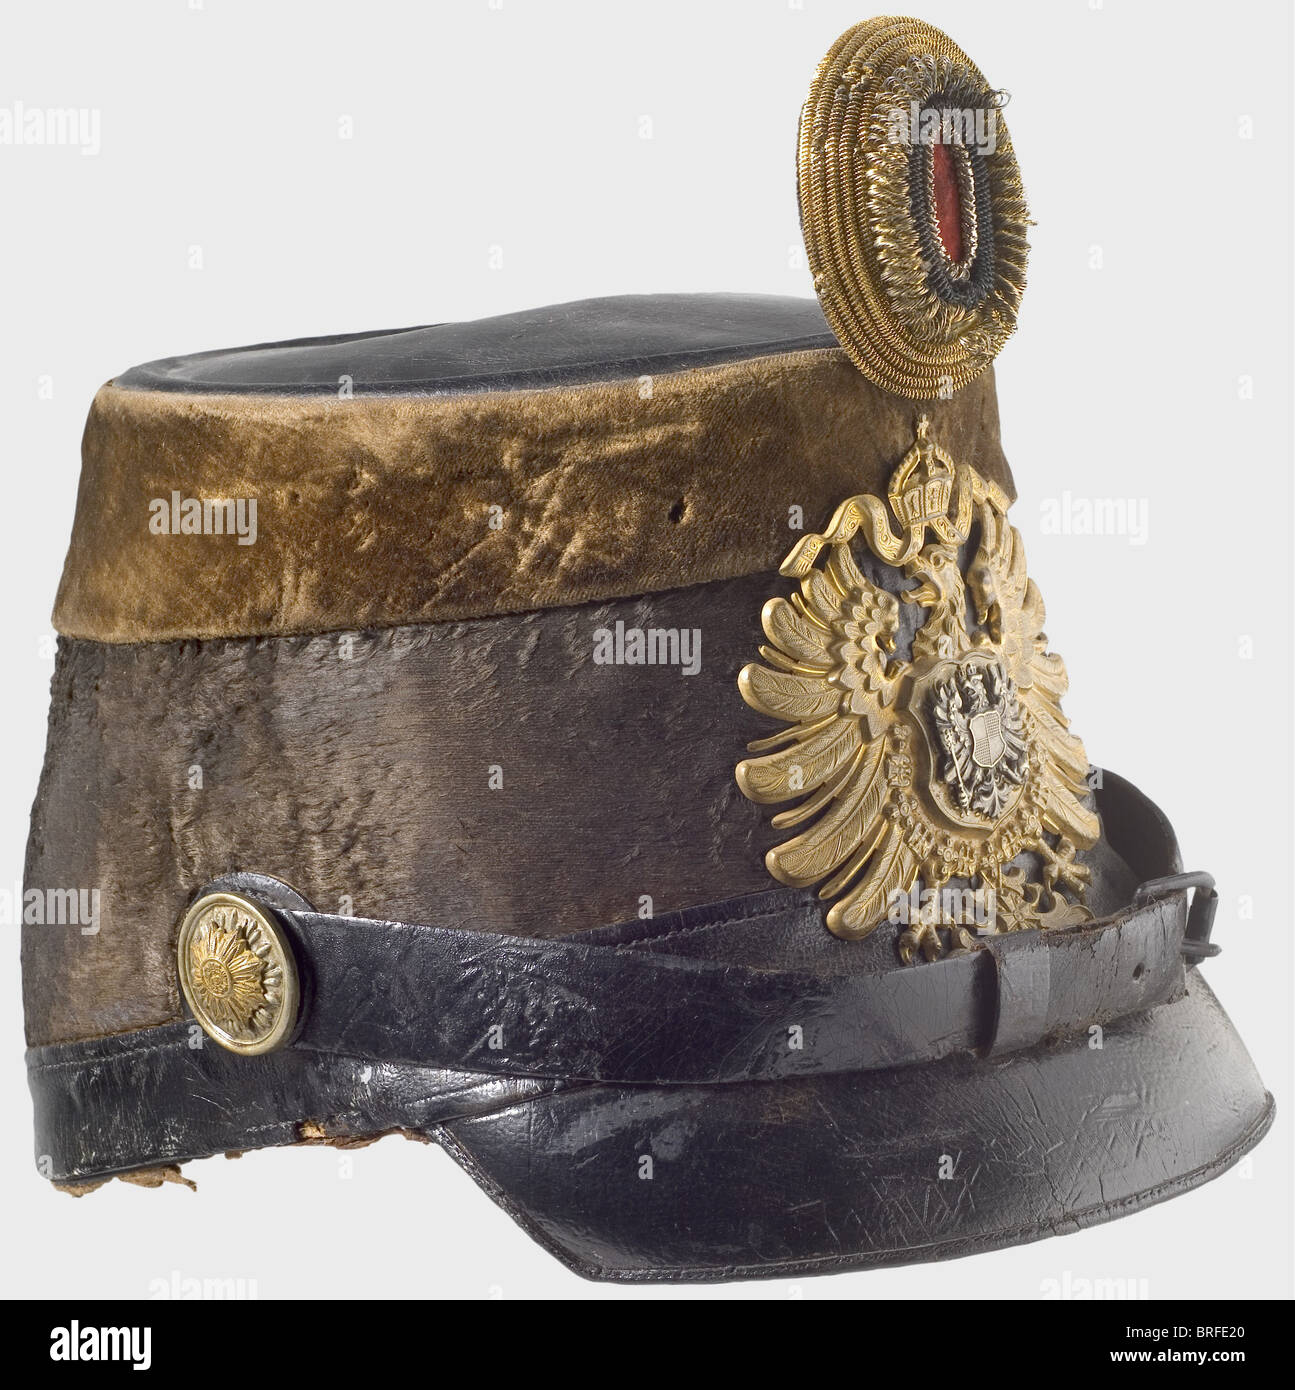 A shako for a customs official, circa 1880. Black mohair felt body, leather top, strap, and peak. A brown velvet band around the upper edge. Gilded imperial eagle plate with a seperate inescutcheon eagle overlay, Leather chinstraps on rosette buttons. Gold-black-red officer's field badge. (Feldzeichen). Lining missing. historic, historical, 19th century, German Empire, Germany, Imperial, object, objects, stills, clipping, cut out, cut-out, cut-outs, militaria, weapon, arms, weapons, arms, uniform, piece, pieces, Stock Photo